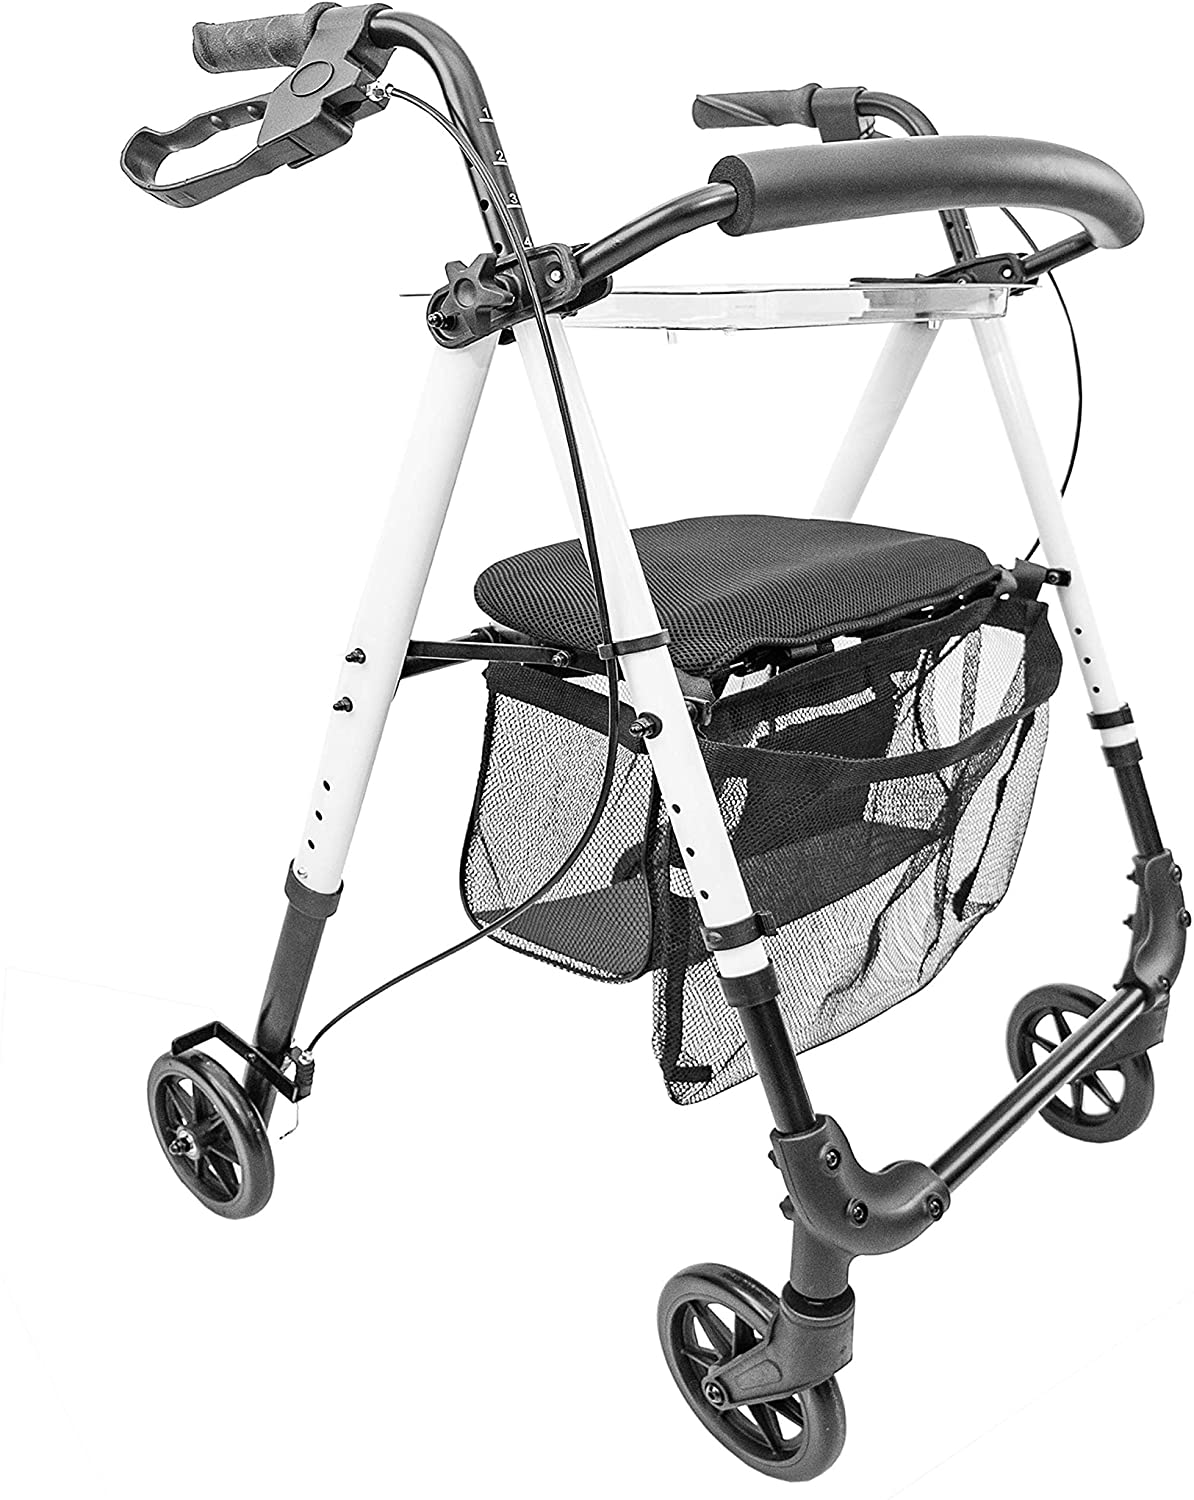 MOBILITY Plus+ IR10+ Indoor Rollator - Walker - Lightweight, Slim and Compact for Use in H